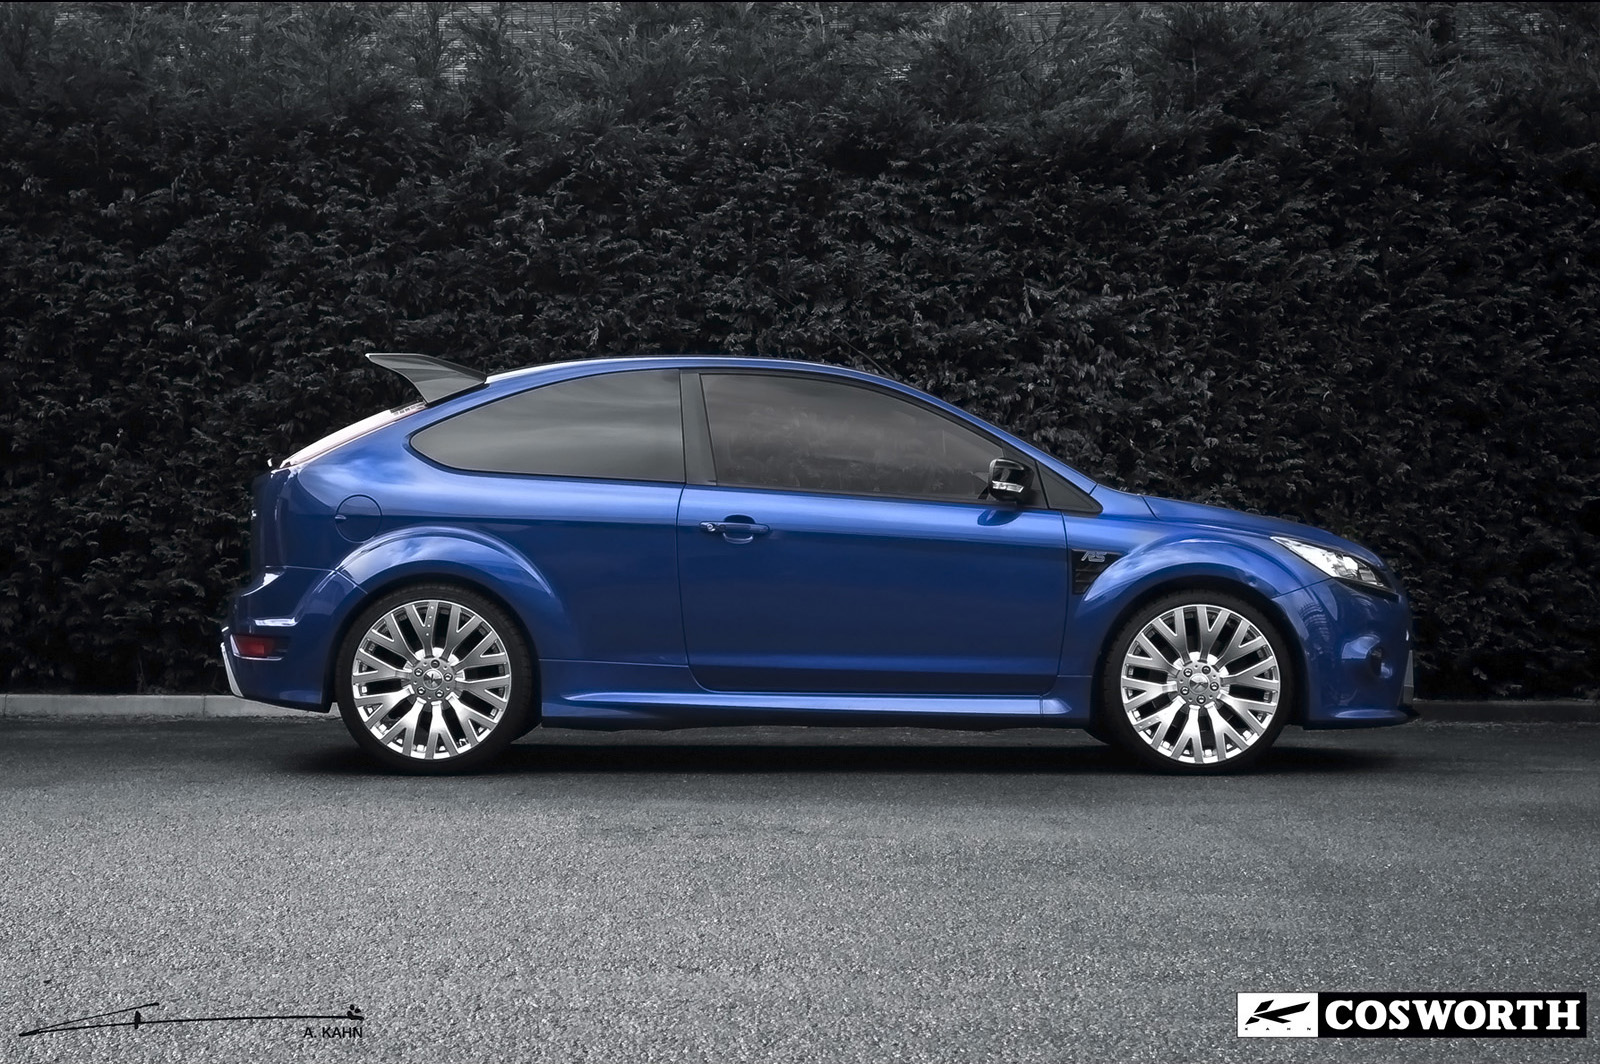 2011 Ford A Kahn Ford Focus Rs Wallpapers - Ford Focus 2011 With 18 Inch Rims - HD Wallpaper 